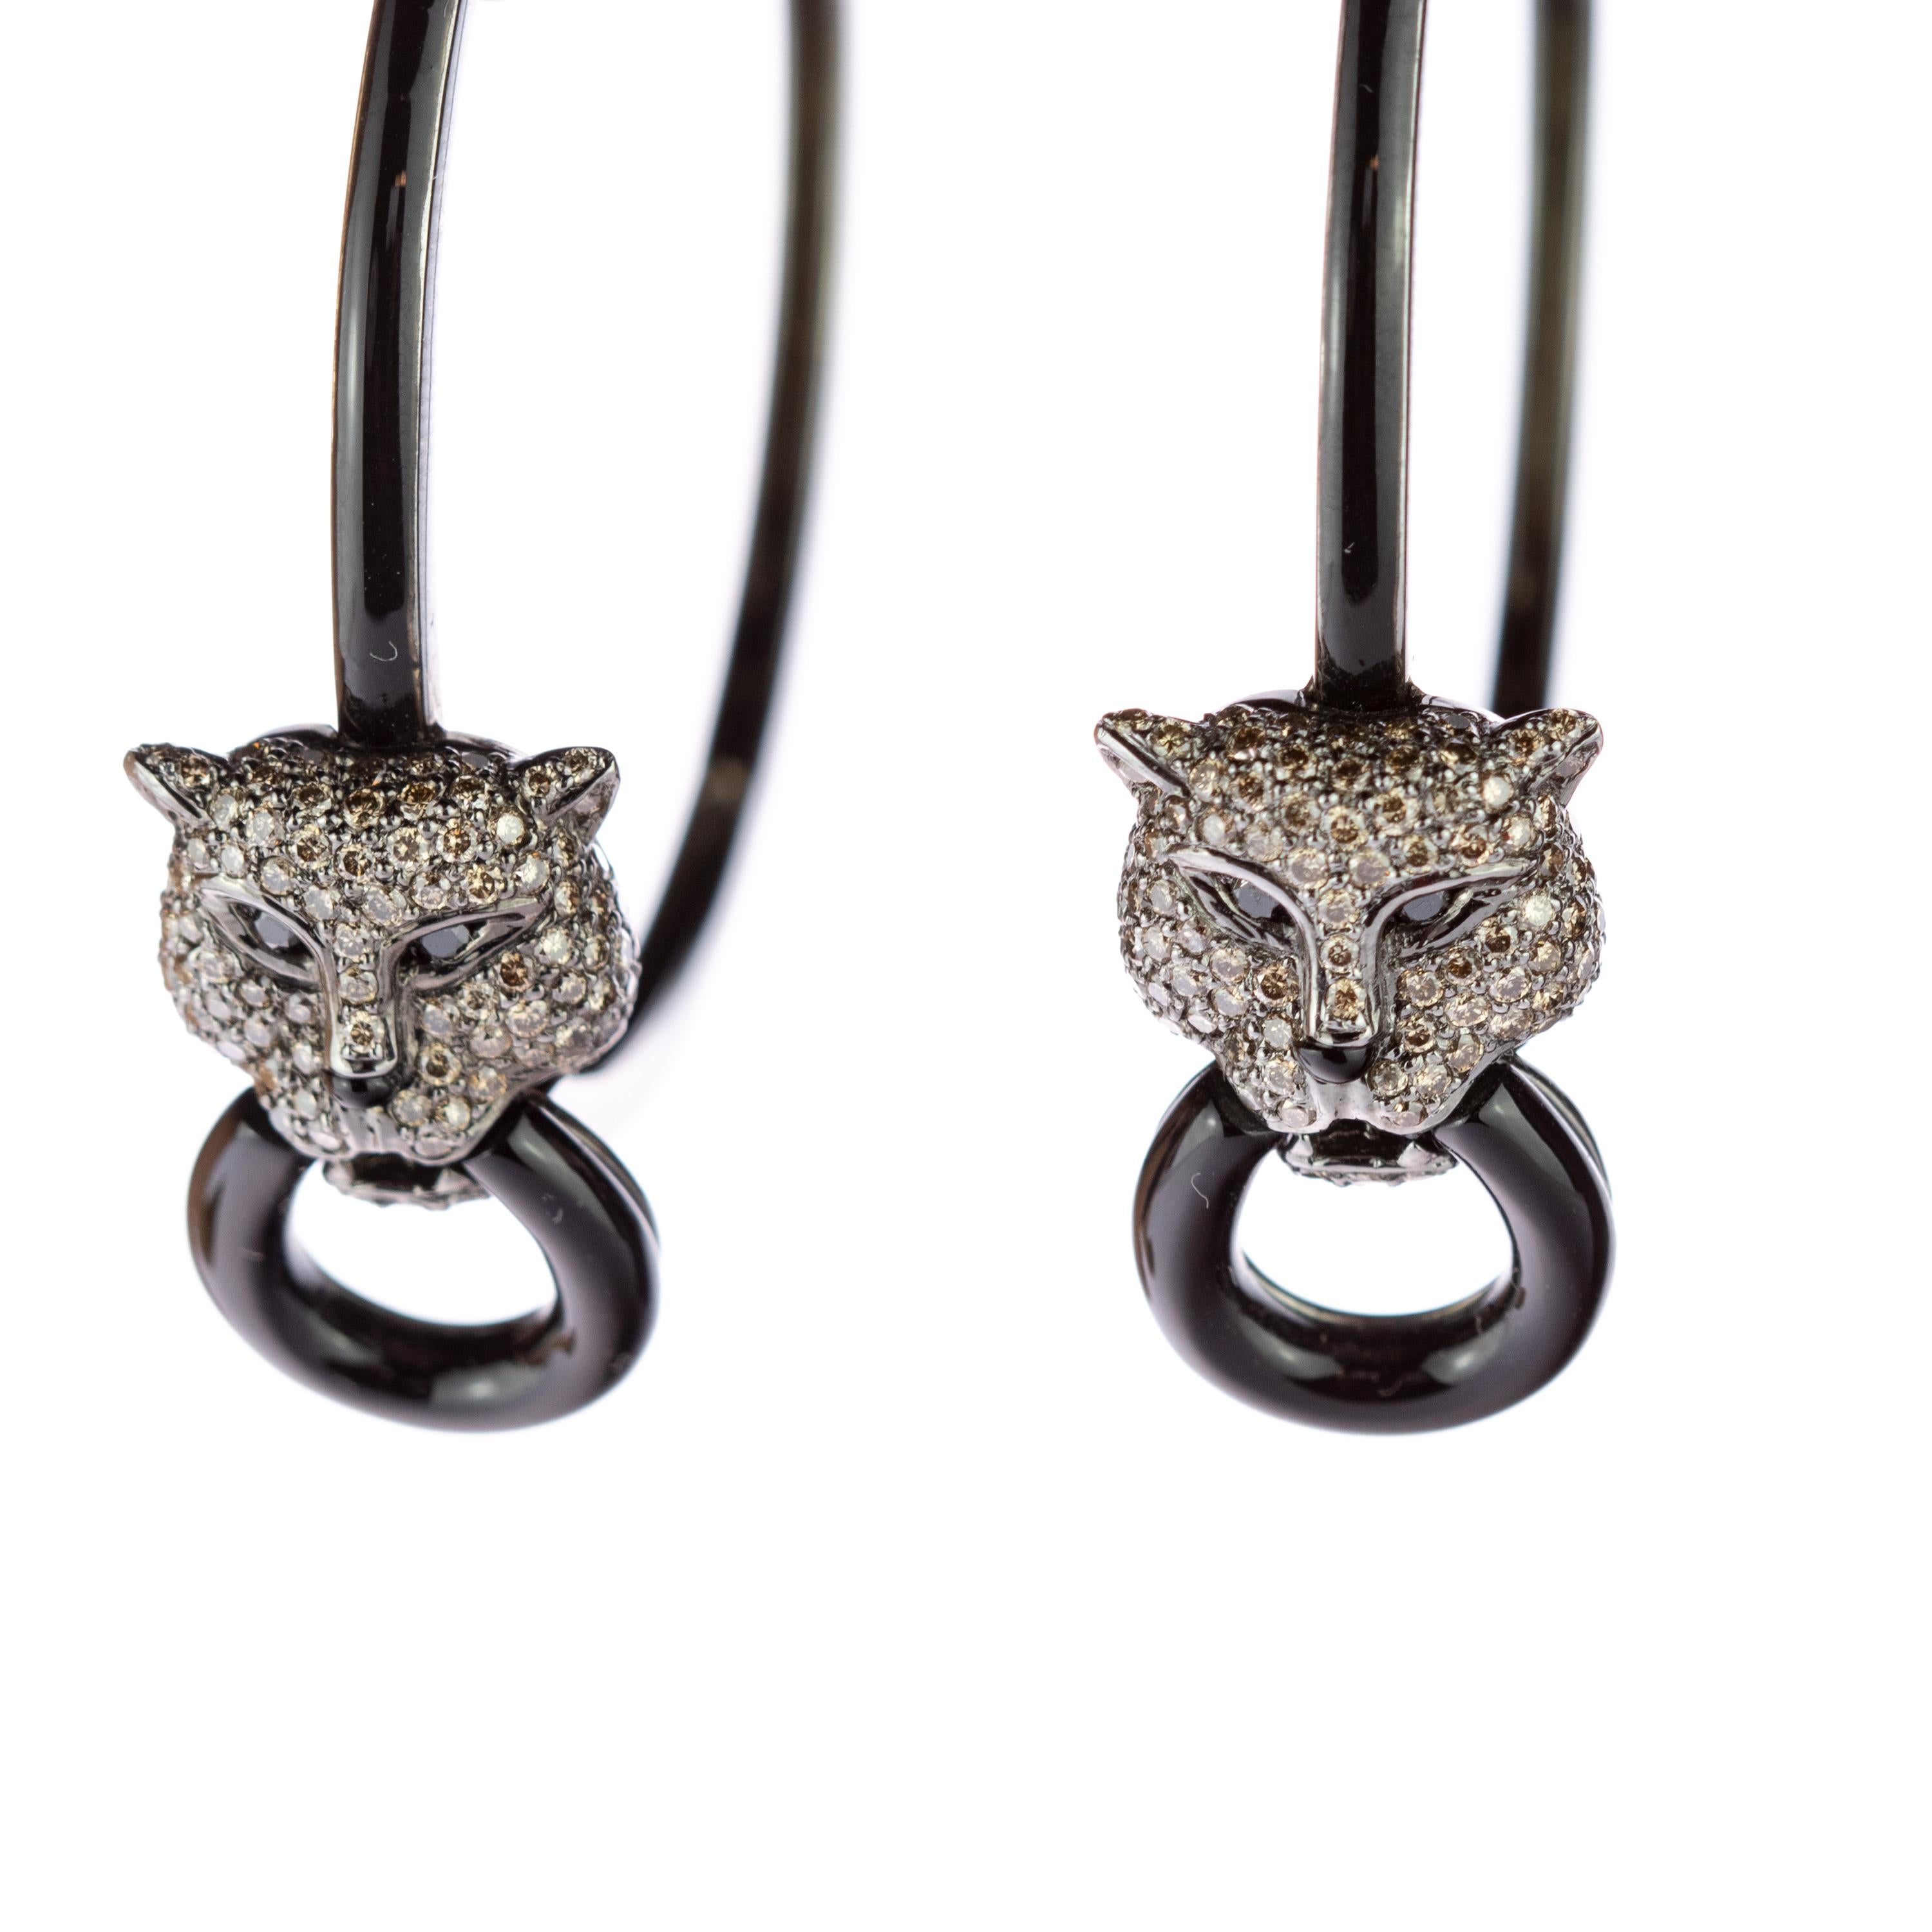 Enjoy the absolutely beauty of this resplendent and marvellous hoop earrings. 2.4 carat diamonds in a tiger, jaguar cat or panther shape with deep black eyes and round nose. The animal have a round donut in its mouth and is posed in a big black